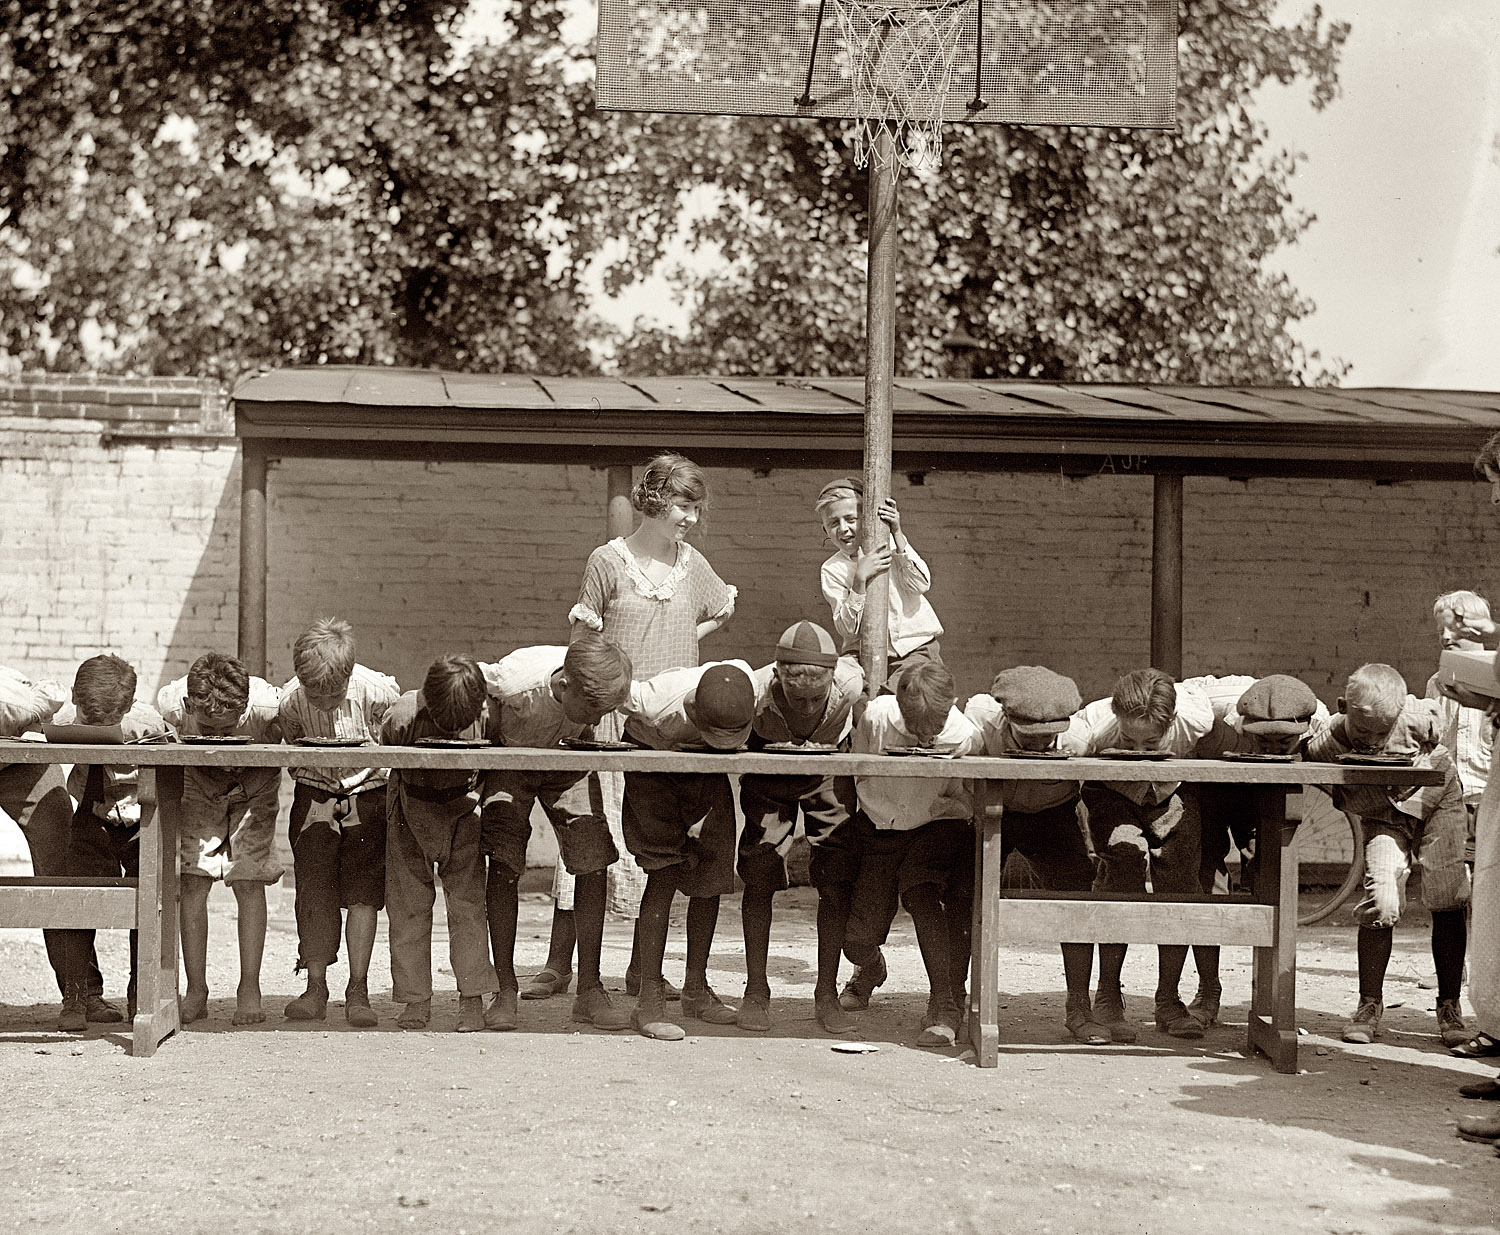 August 2, 1923. "Pie eating contest, Jefferson school." More of the pie-eating boys from 1923. View full size. National Photo Company Collection.